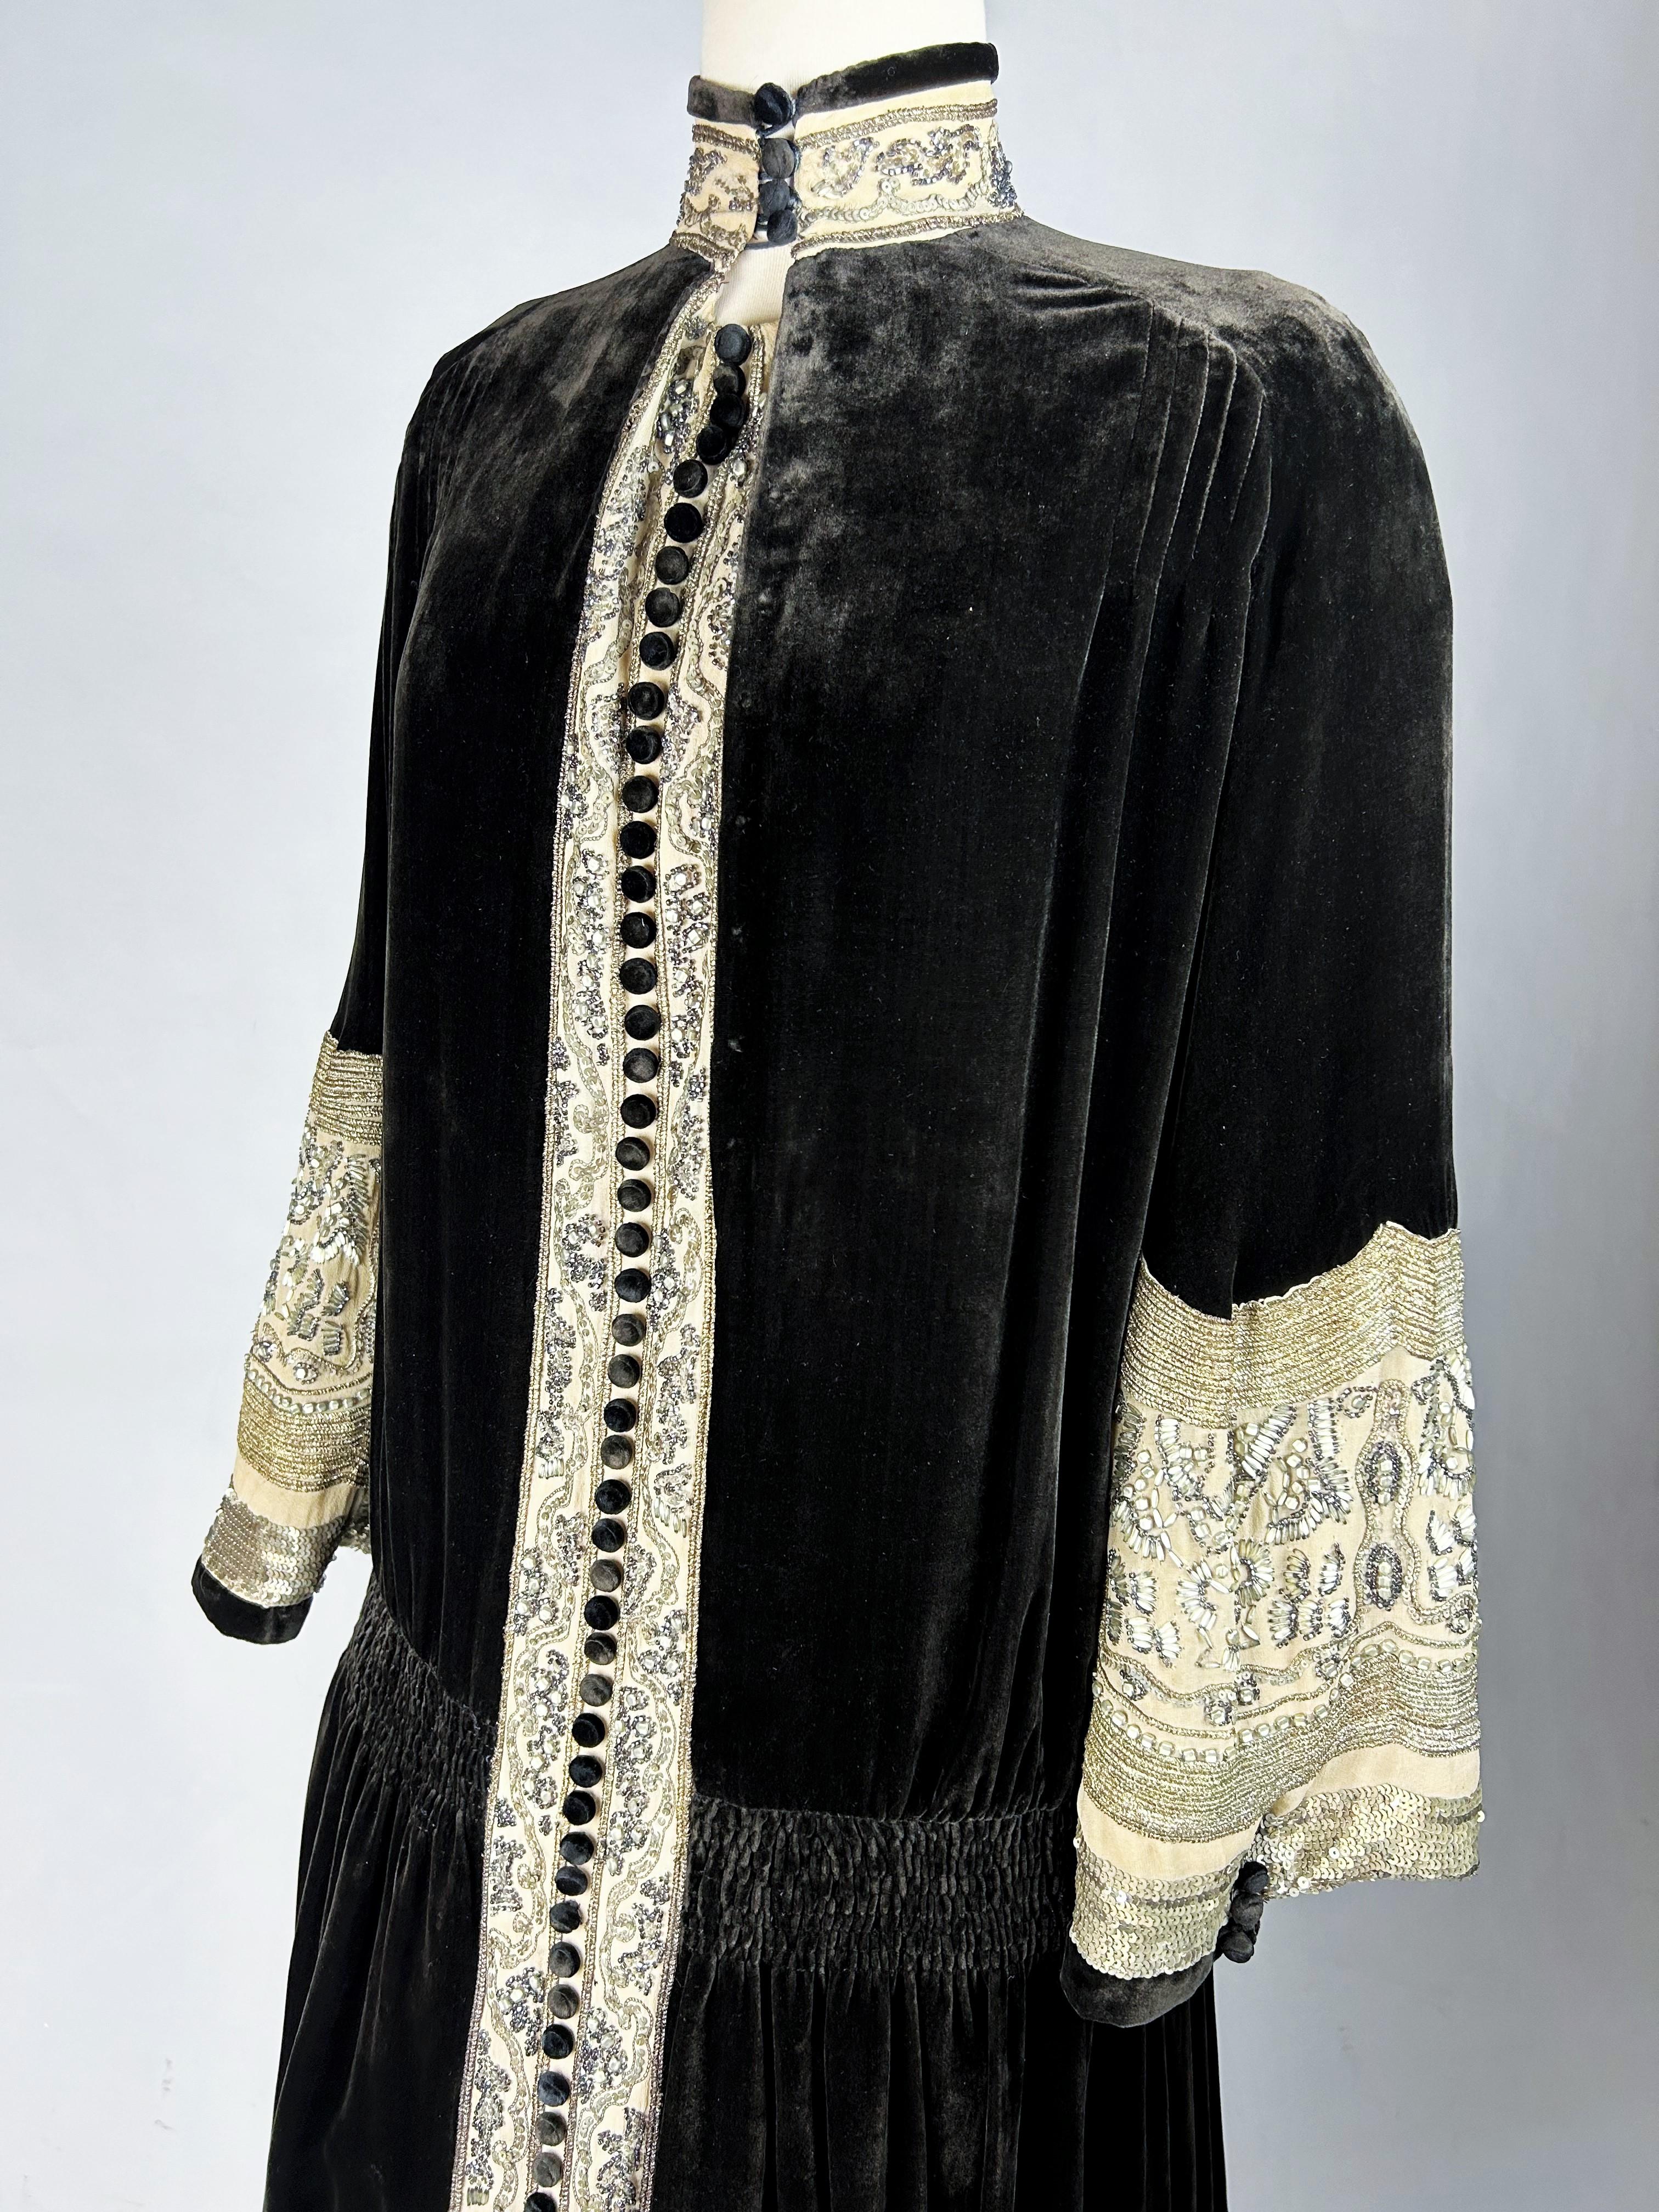 Circa 1923/1924
Paris
Redingote evening dress in chimney sweep brown velvet embroidered in a champagne color by the famous Maison Worth. Ample straight cut, long sleeves, high collar buttoned Russian style, finely gathered in three rows at the